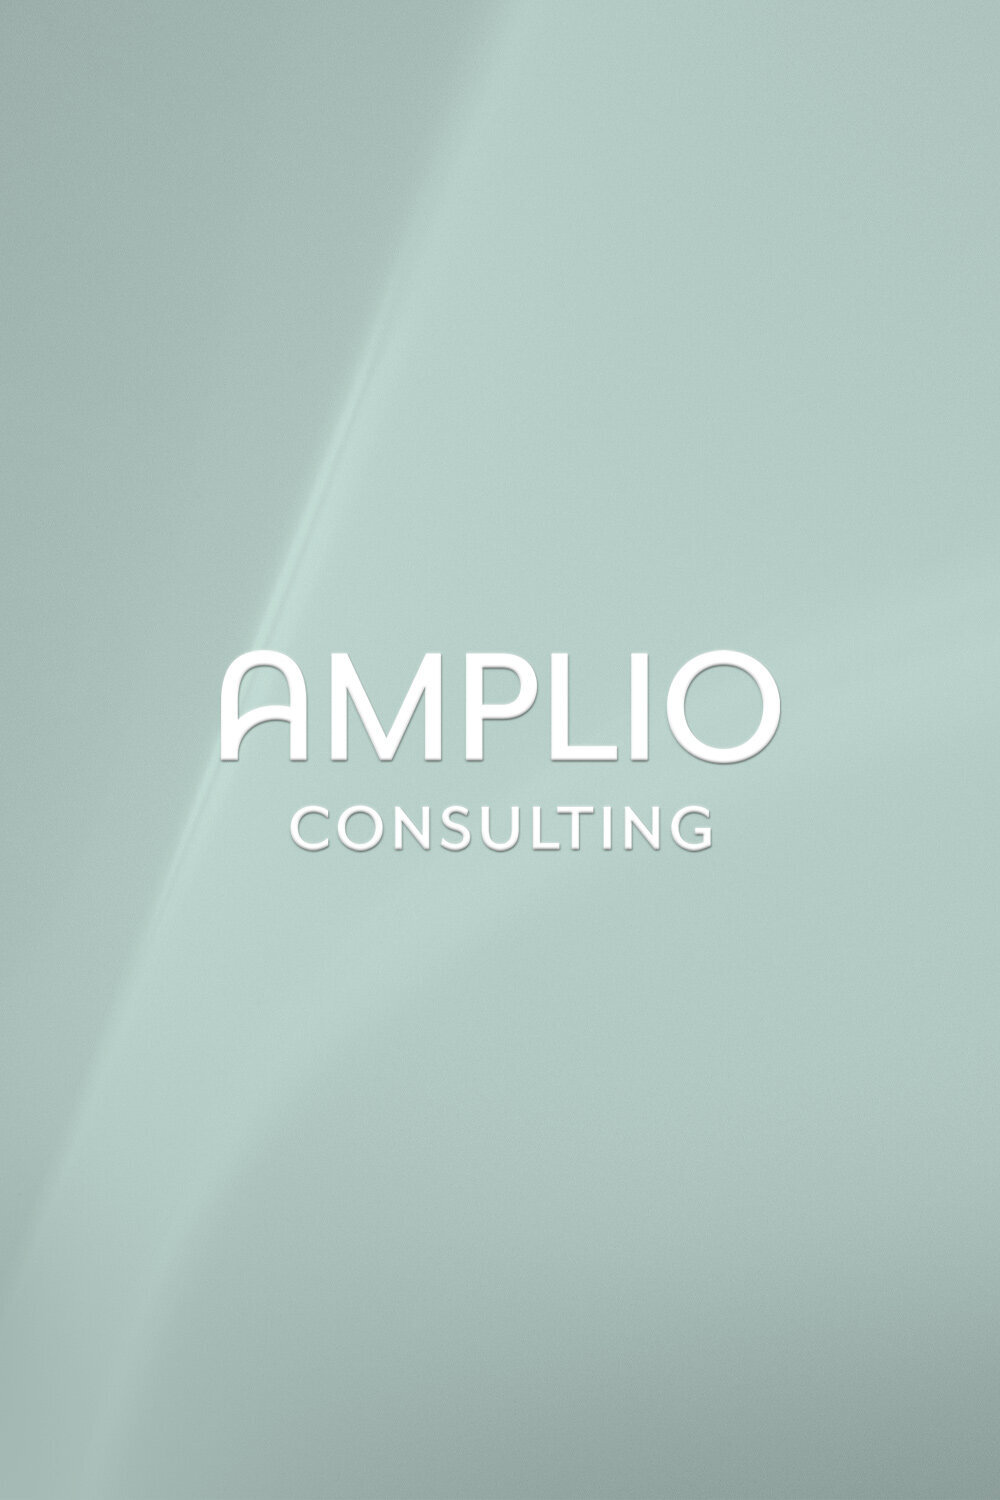 logo and brand design for consulting agency